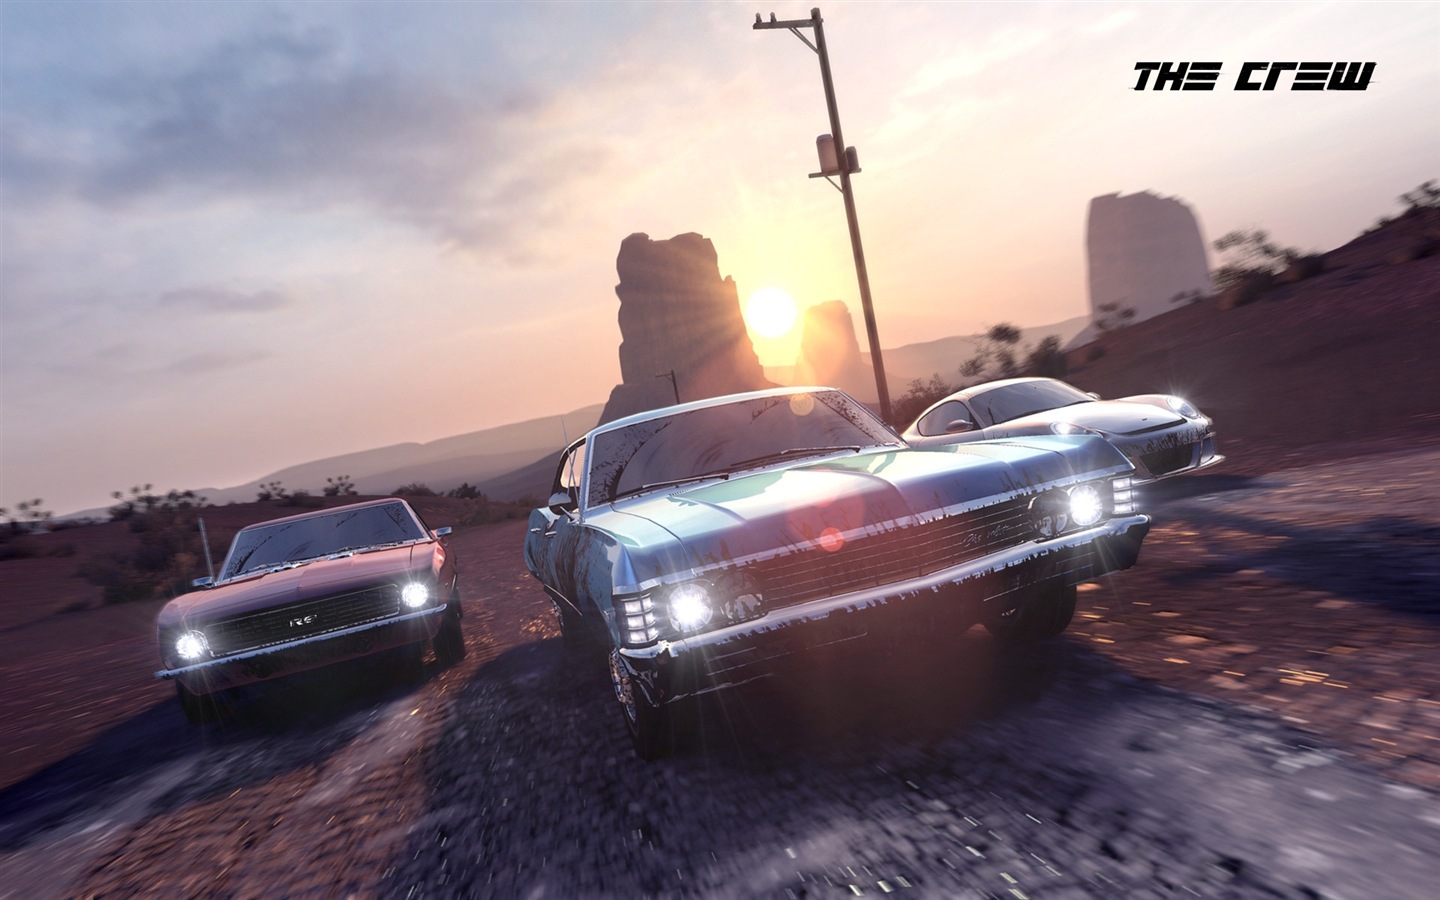 The Crew game HD wallpapers #4 - 1440x900